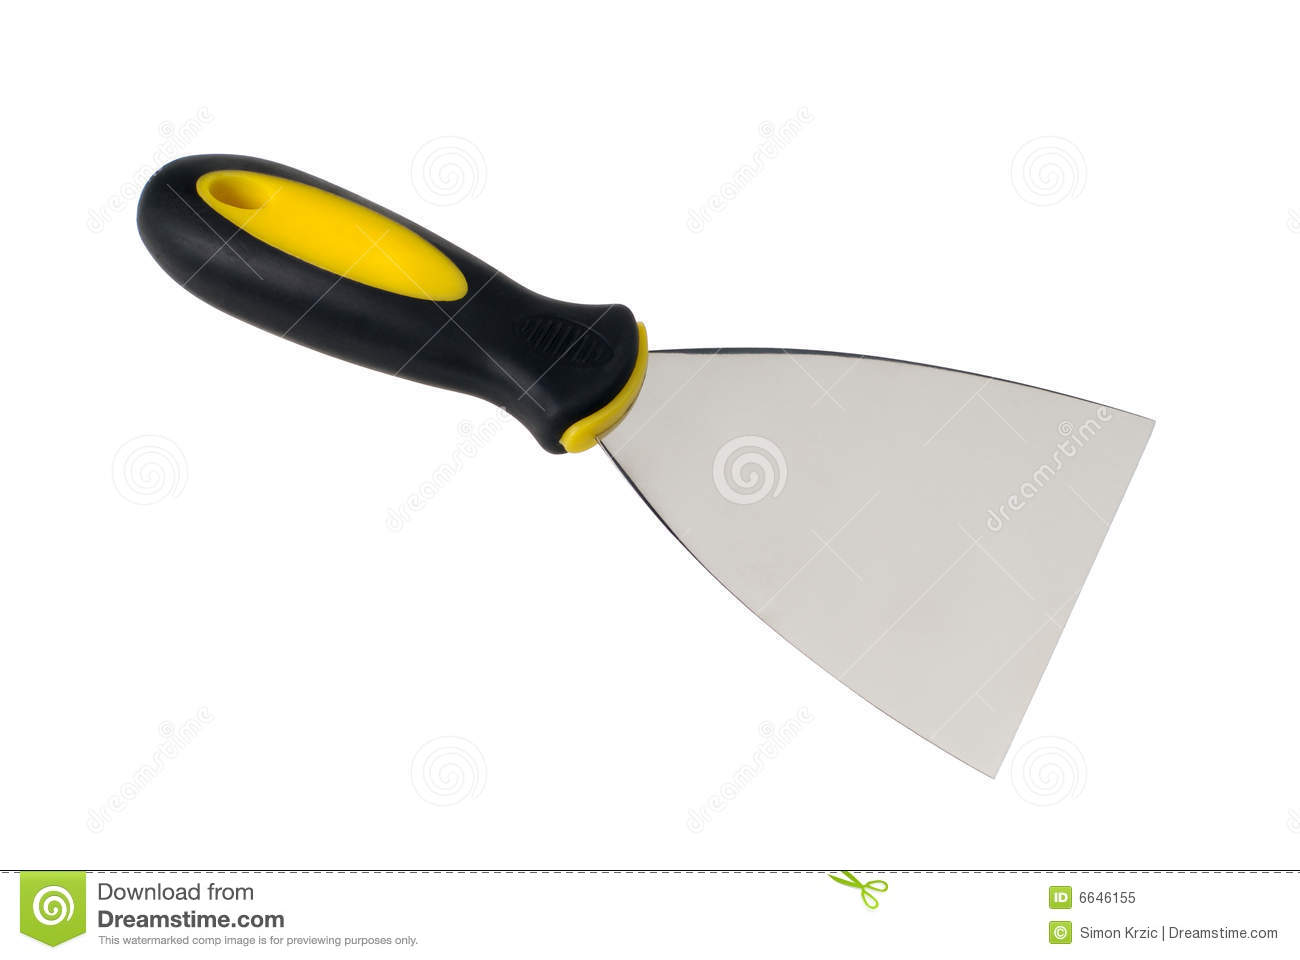 Putty Knife With A Plastic Handle Isolated On A White Background 